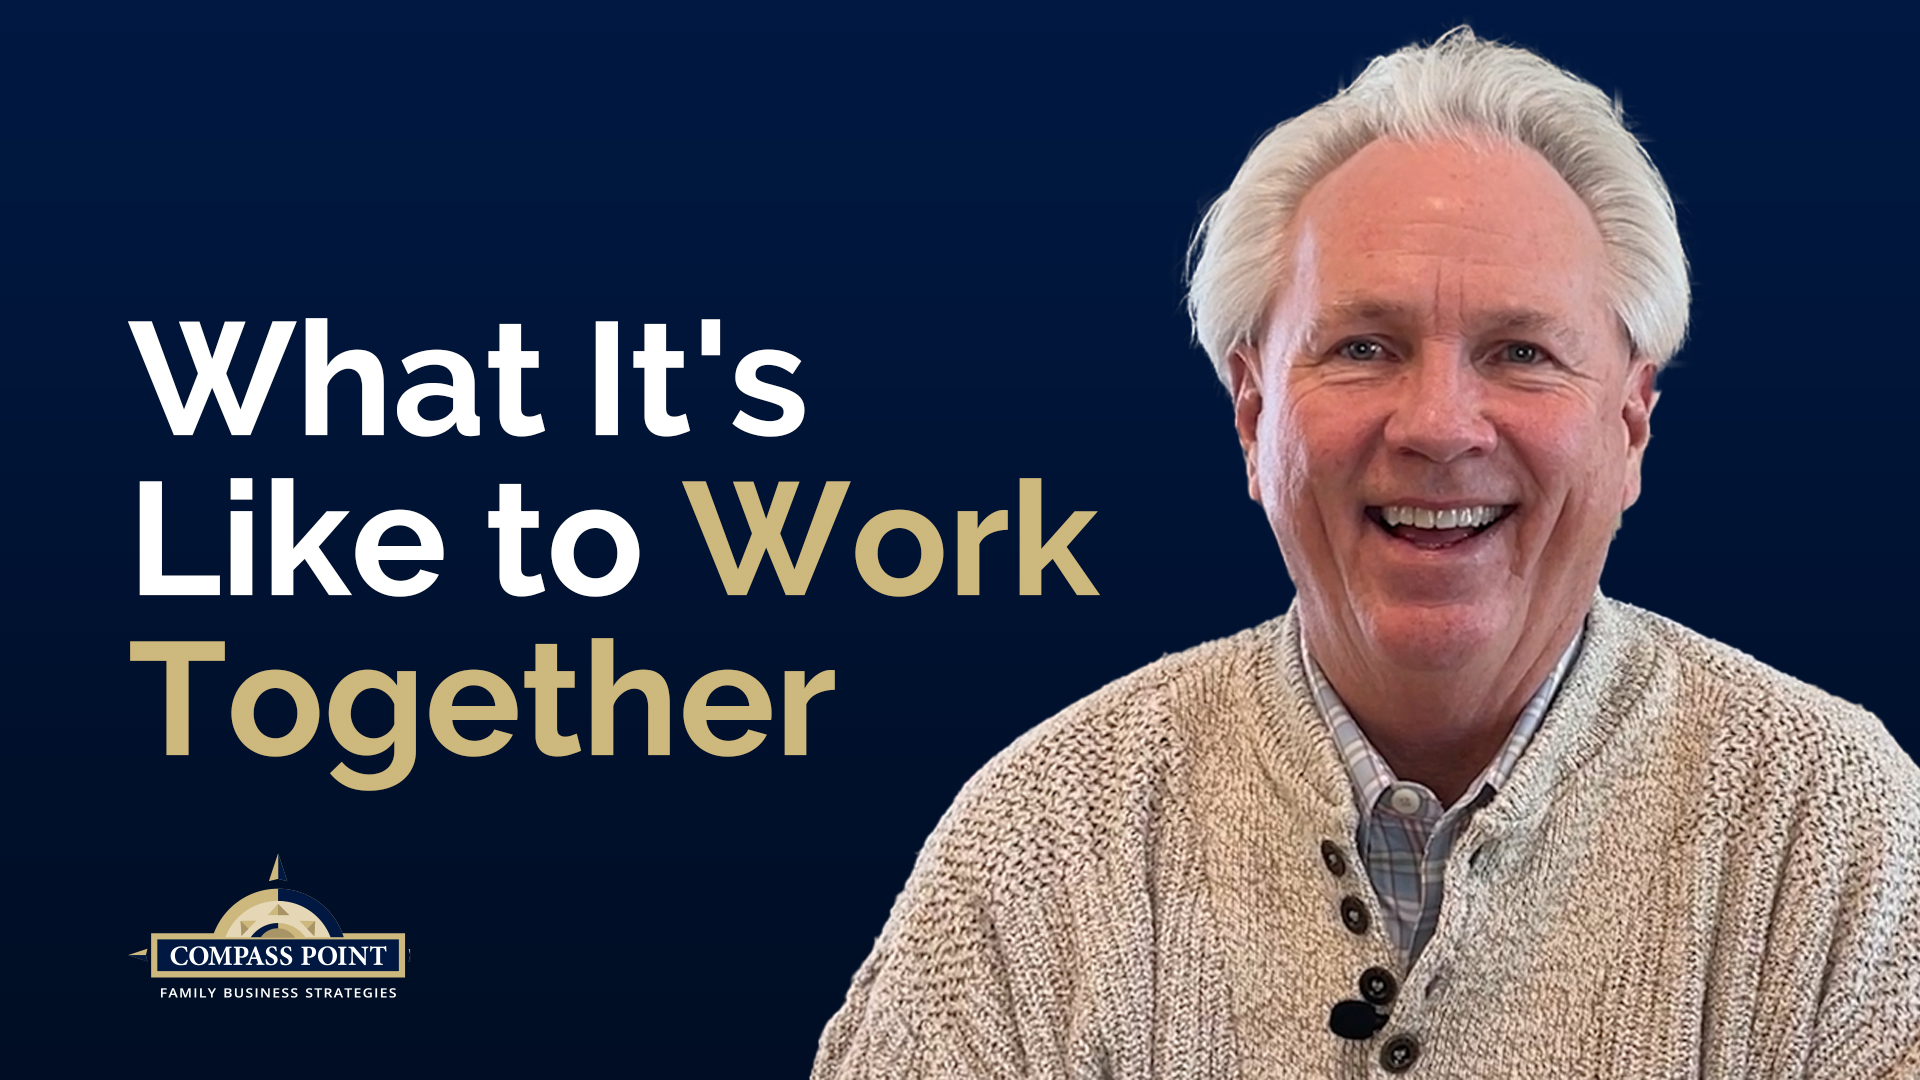 What It's Like to Work Together - Tom Garrity, Compass Point Consulting